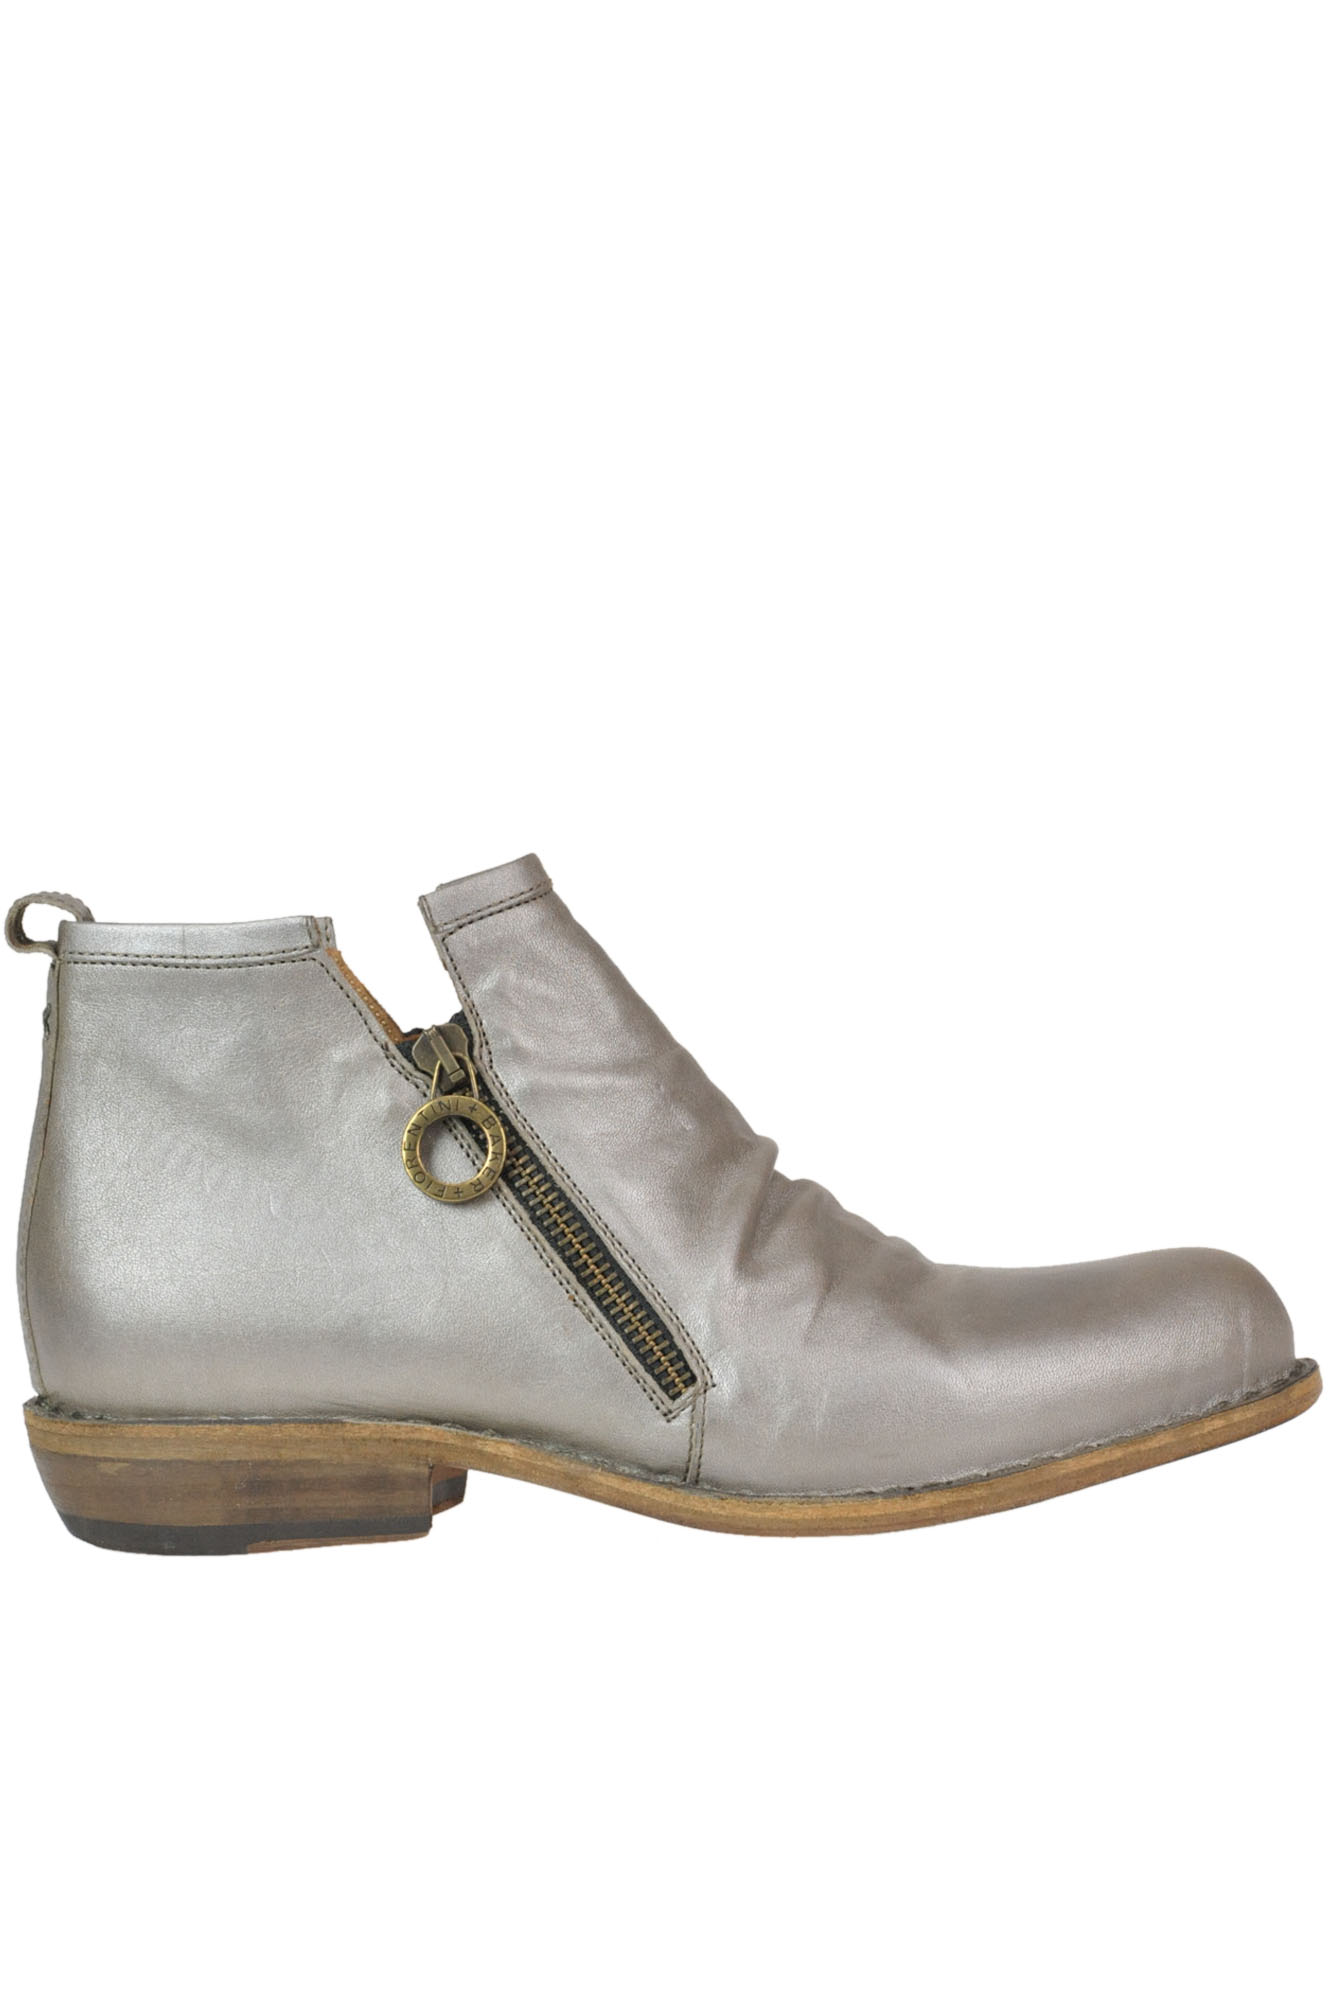 Fiorentini + Baker Metallic Effect Leather Ankle Boots In Silver